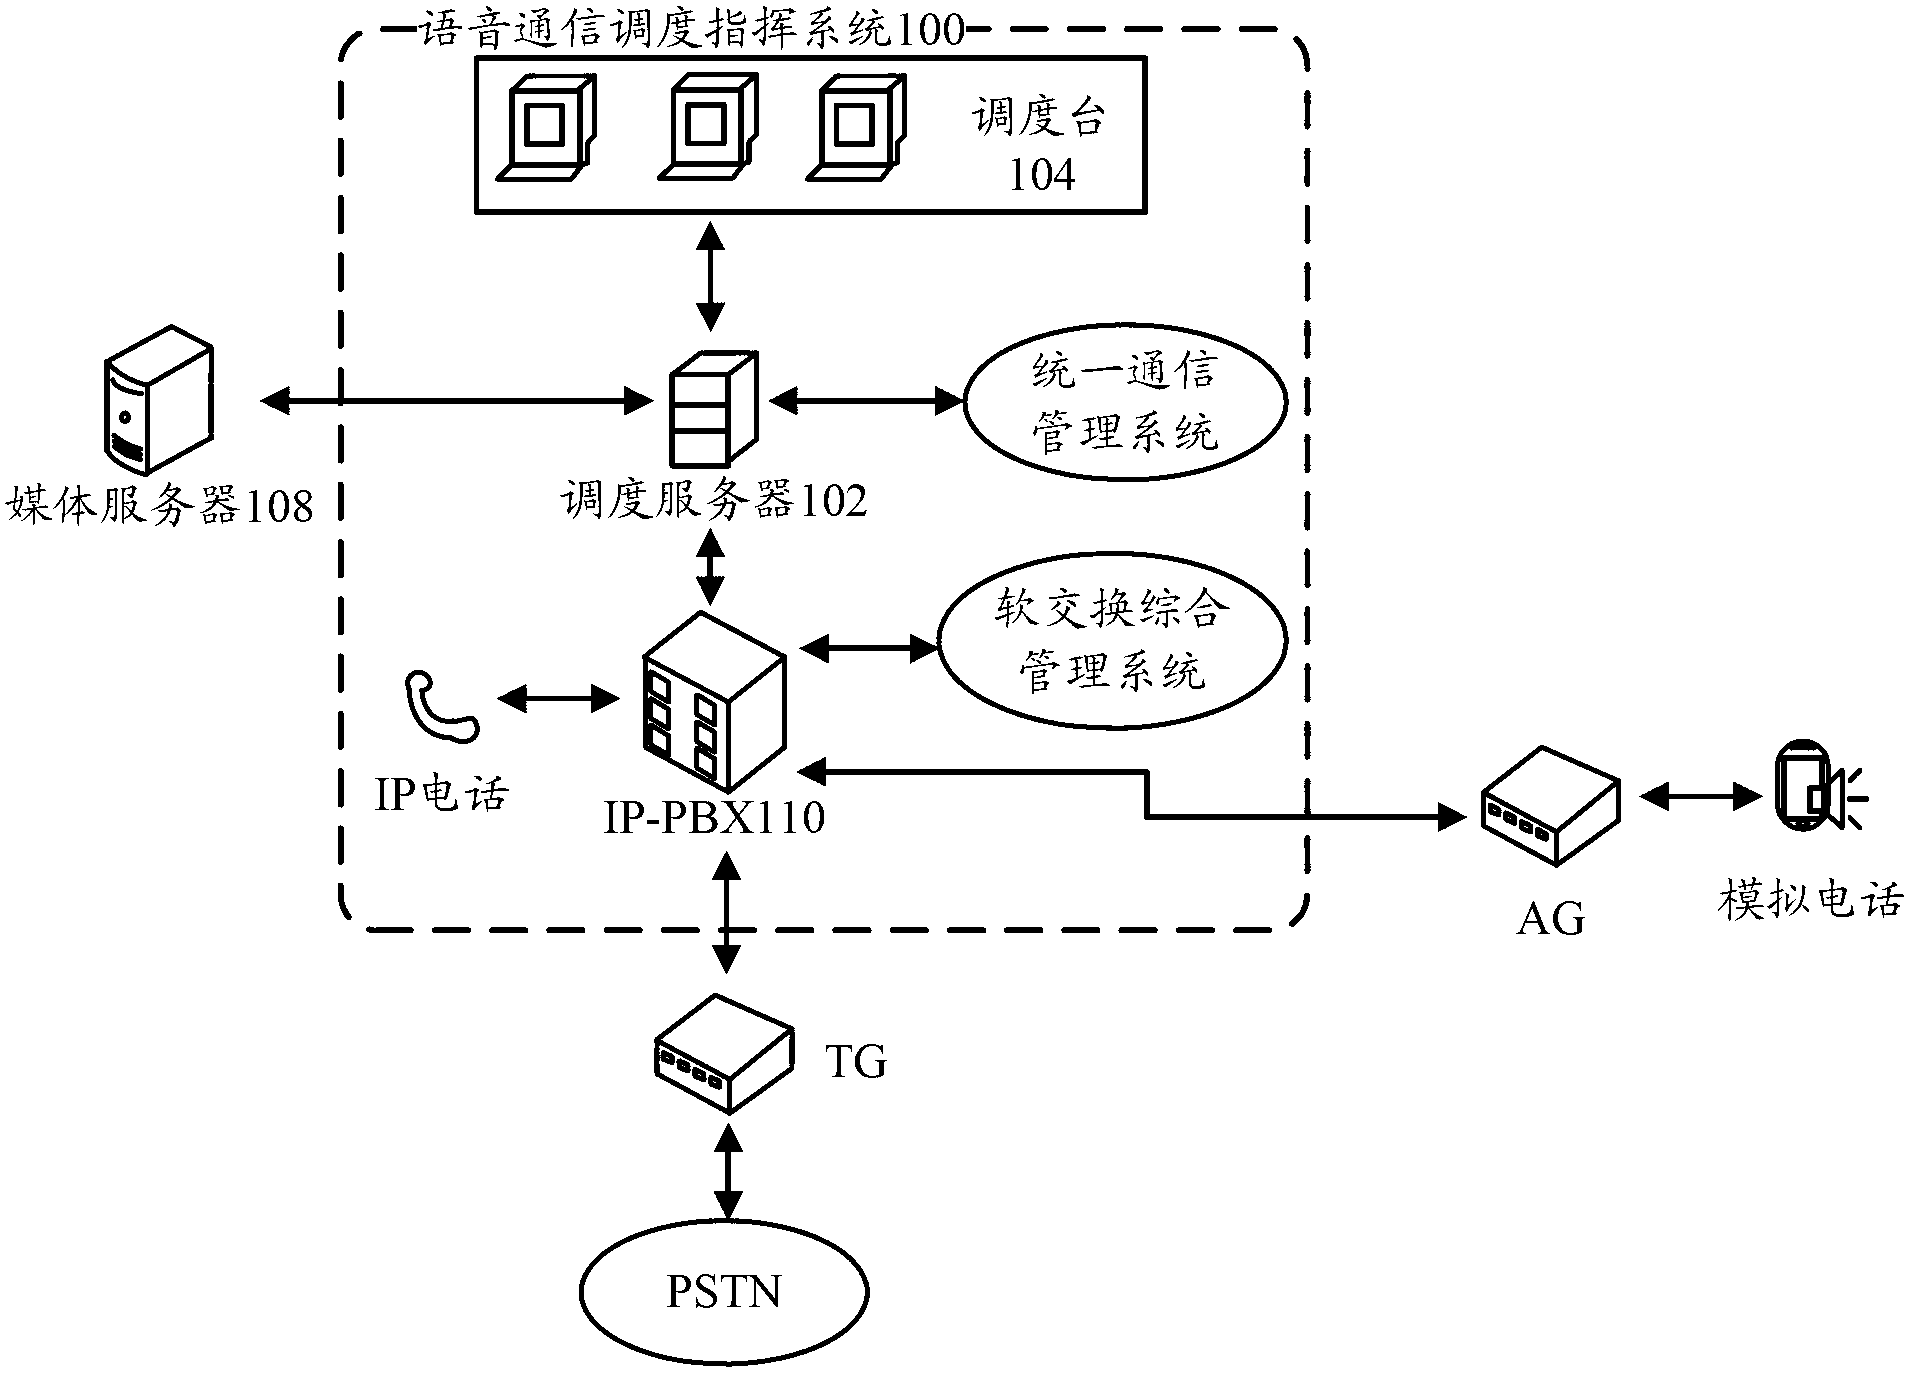 Voice communication scheduling command system